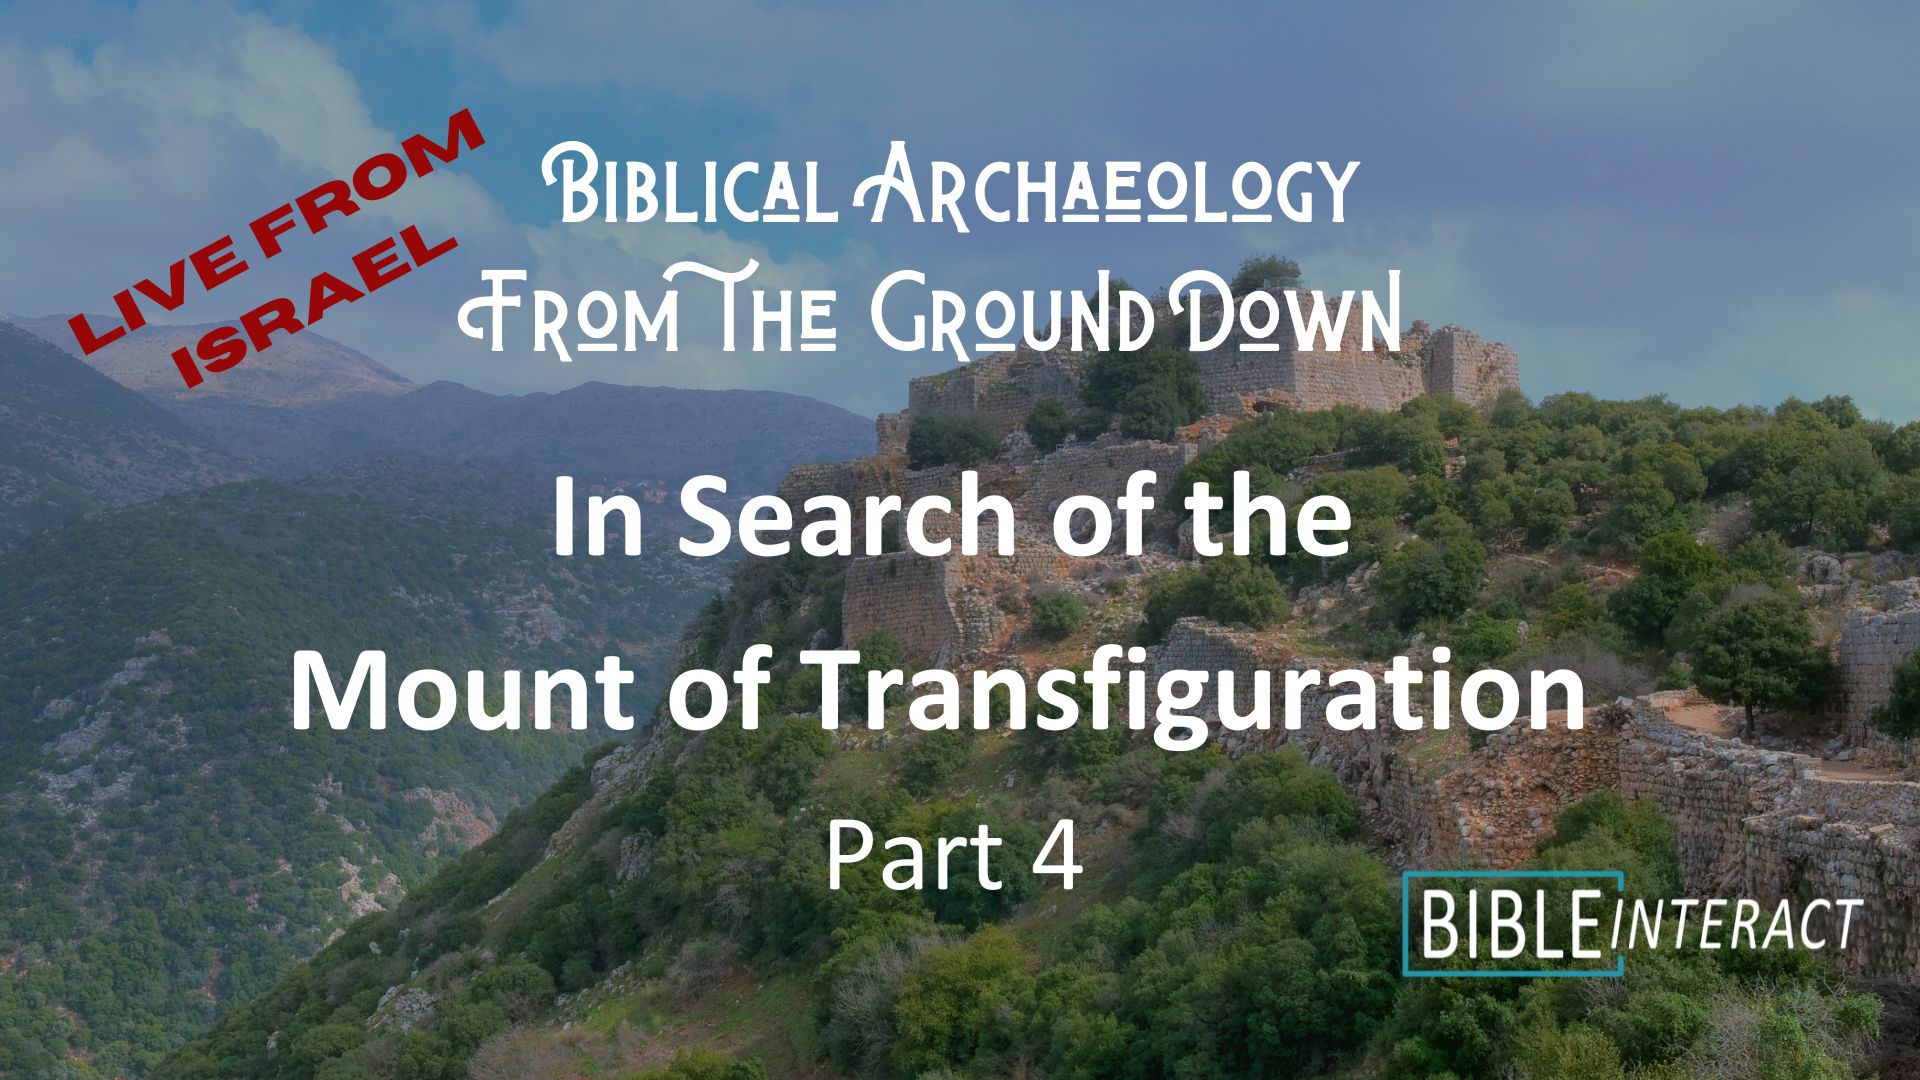 ▶️ Biblical Archaeology From the Ground Down: In Search of the Mount of Transfiguration, Part 4